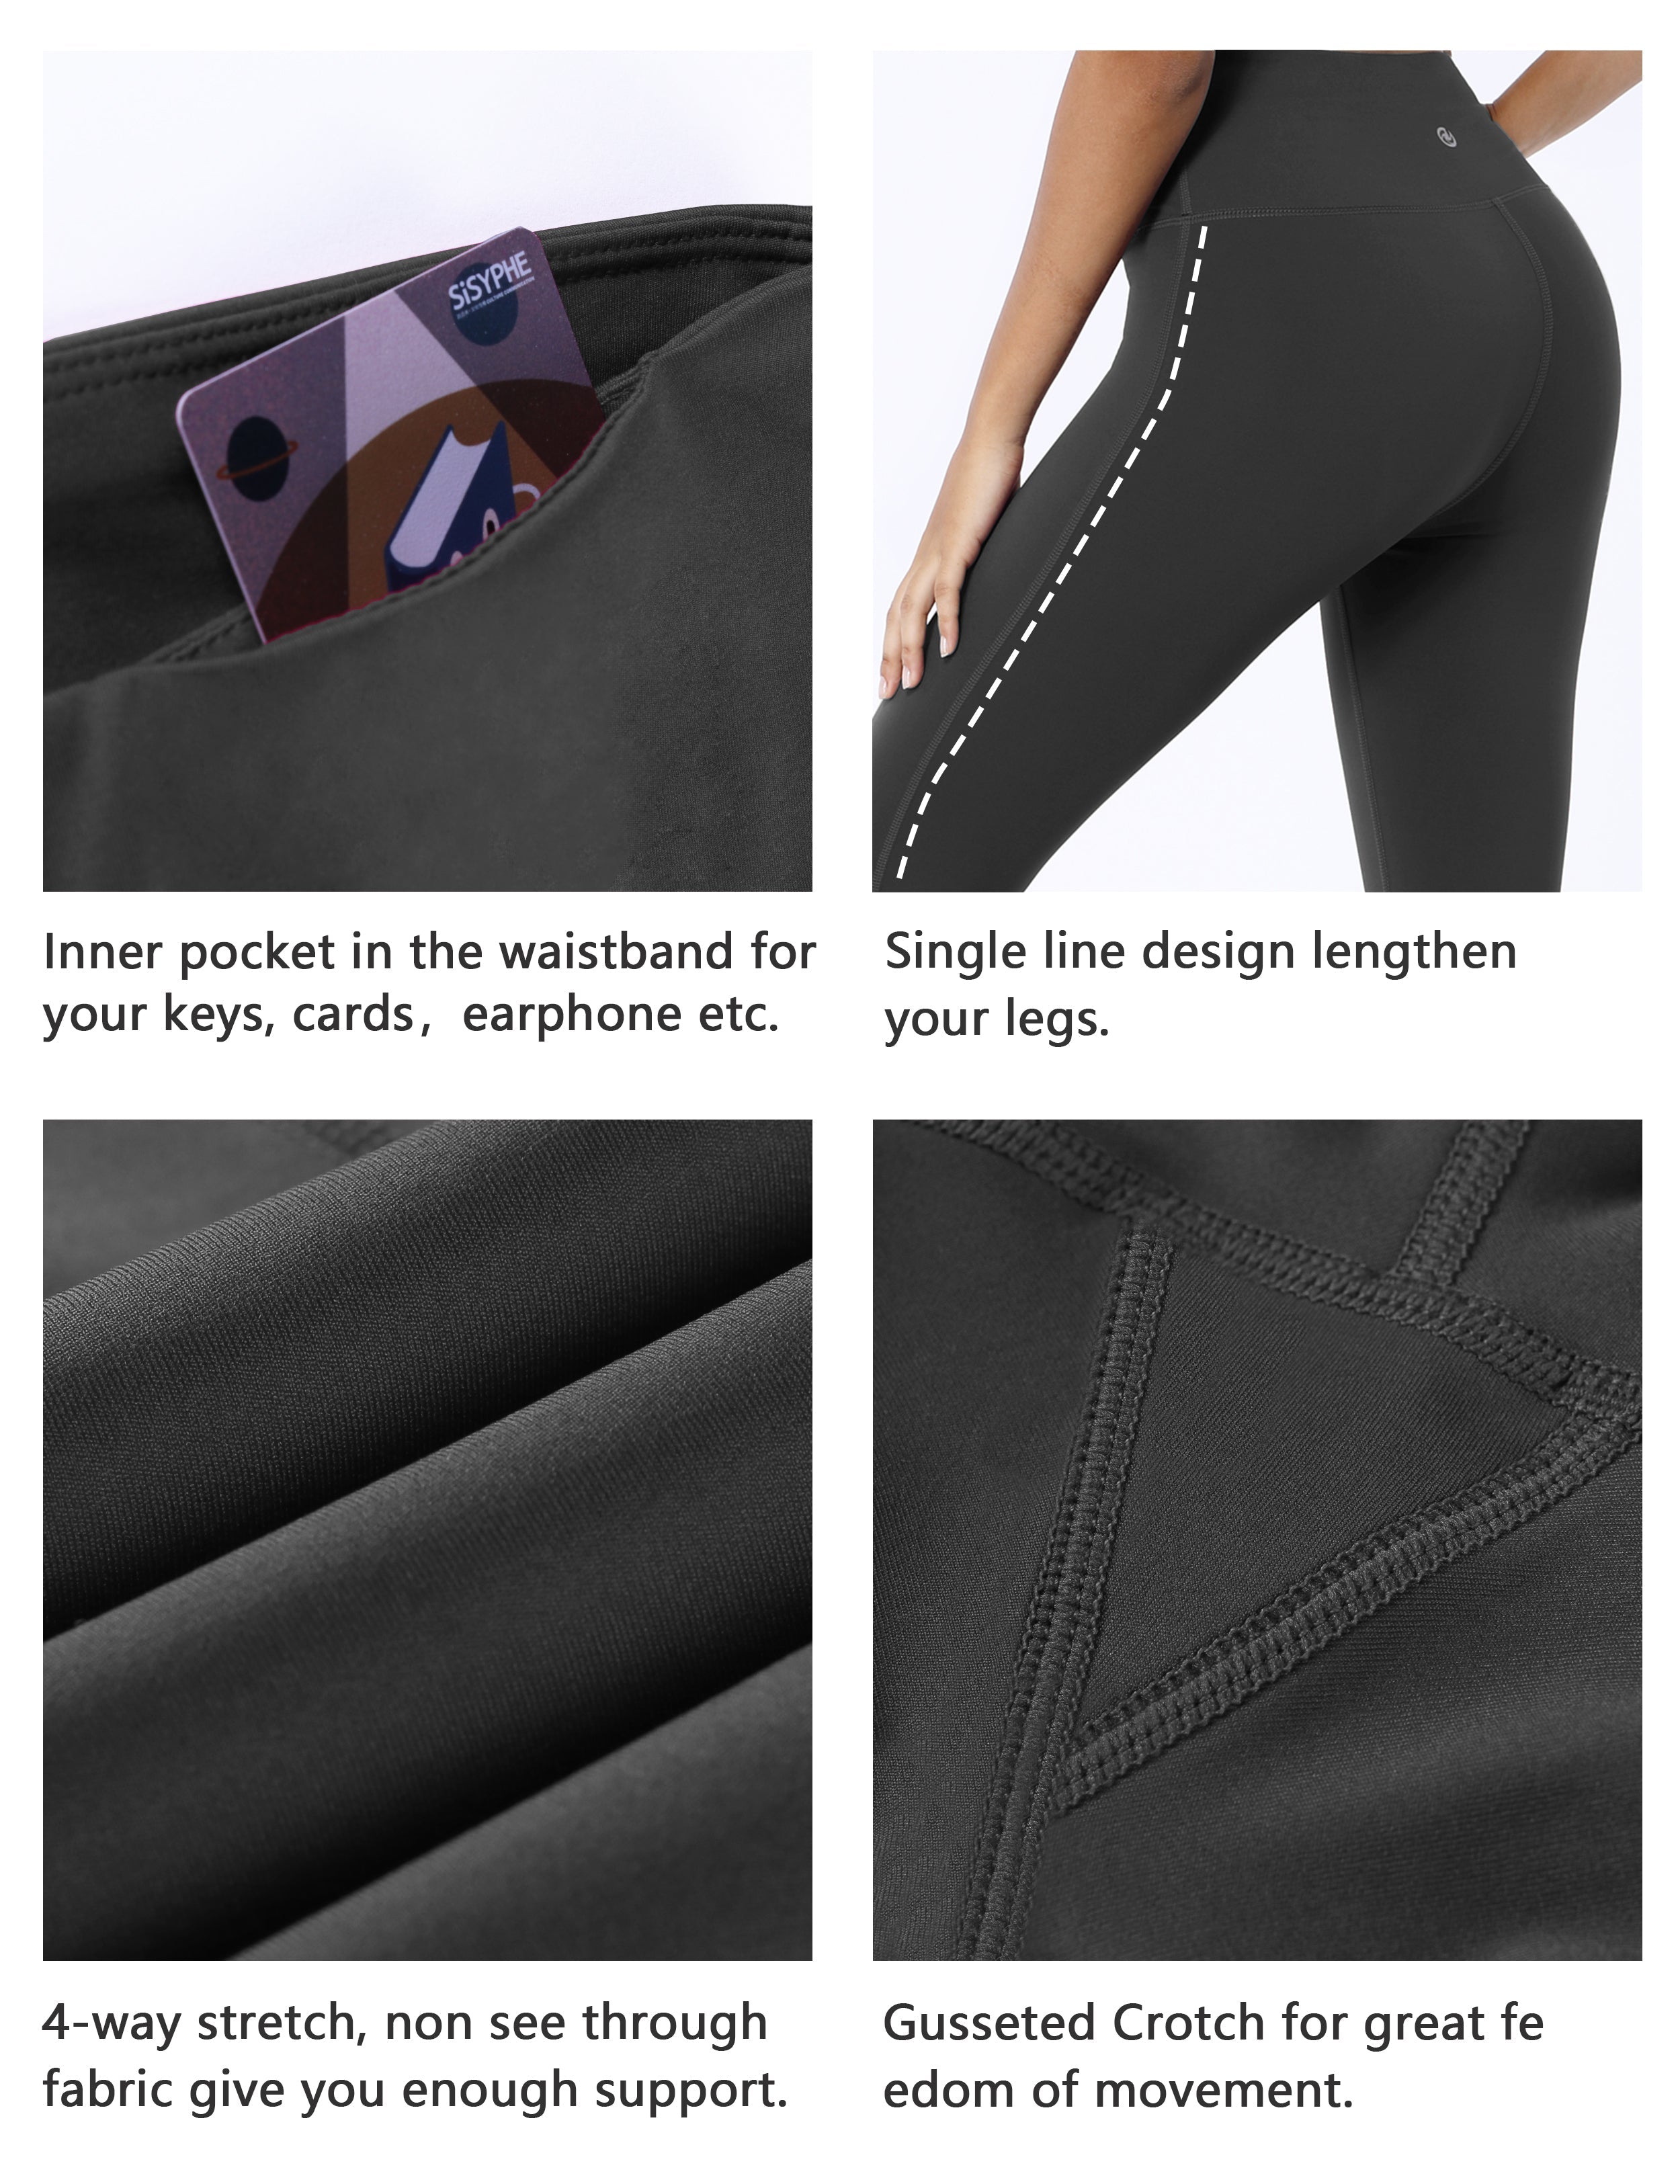 High Waist Side Line Jogging Pants shadowcharcoal Side Line is Make Your Legs Look Longer and Thinner 75%Nylon/25%Spandex Fabric doesn't attract lint easily 4-way stretch No see-through Moisture-wicking Tummy control Inner pocket Two lengths